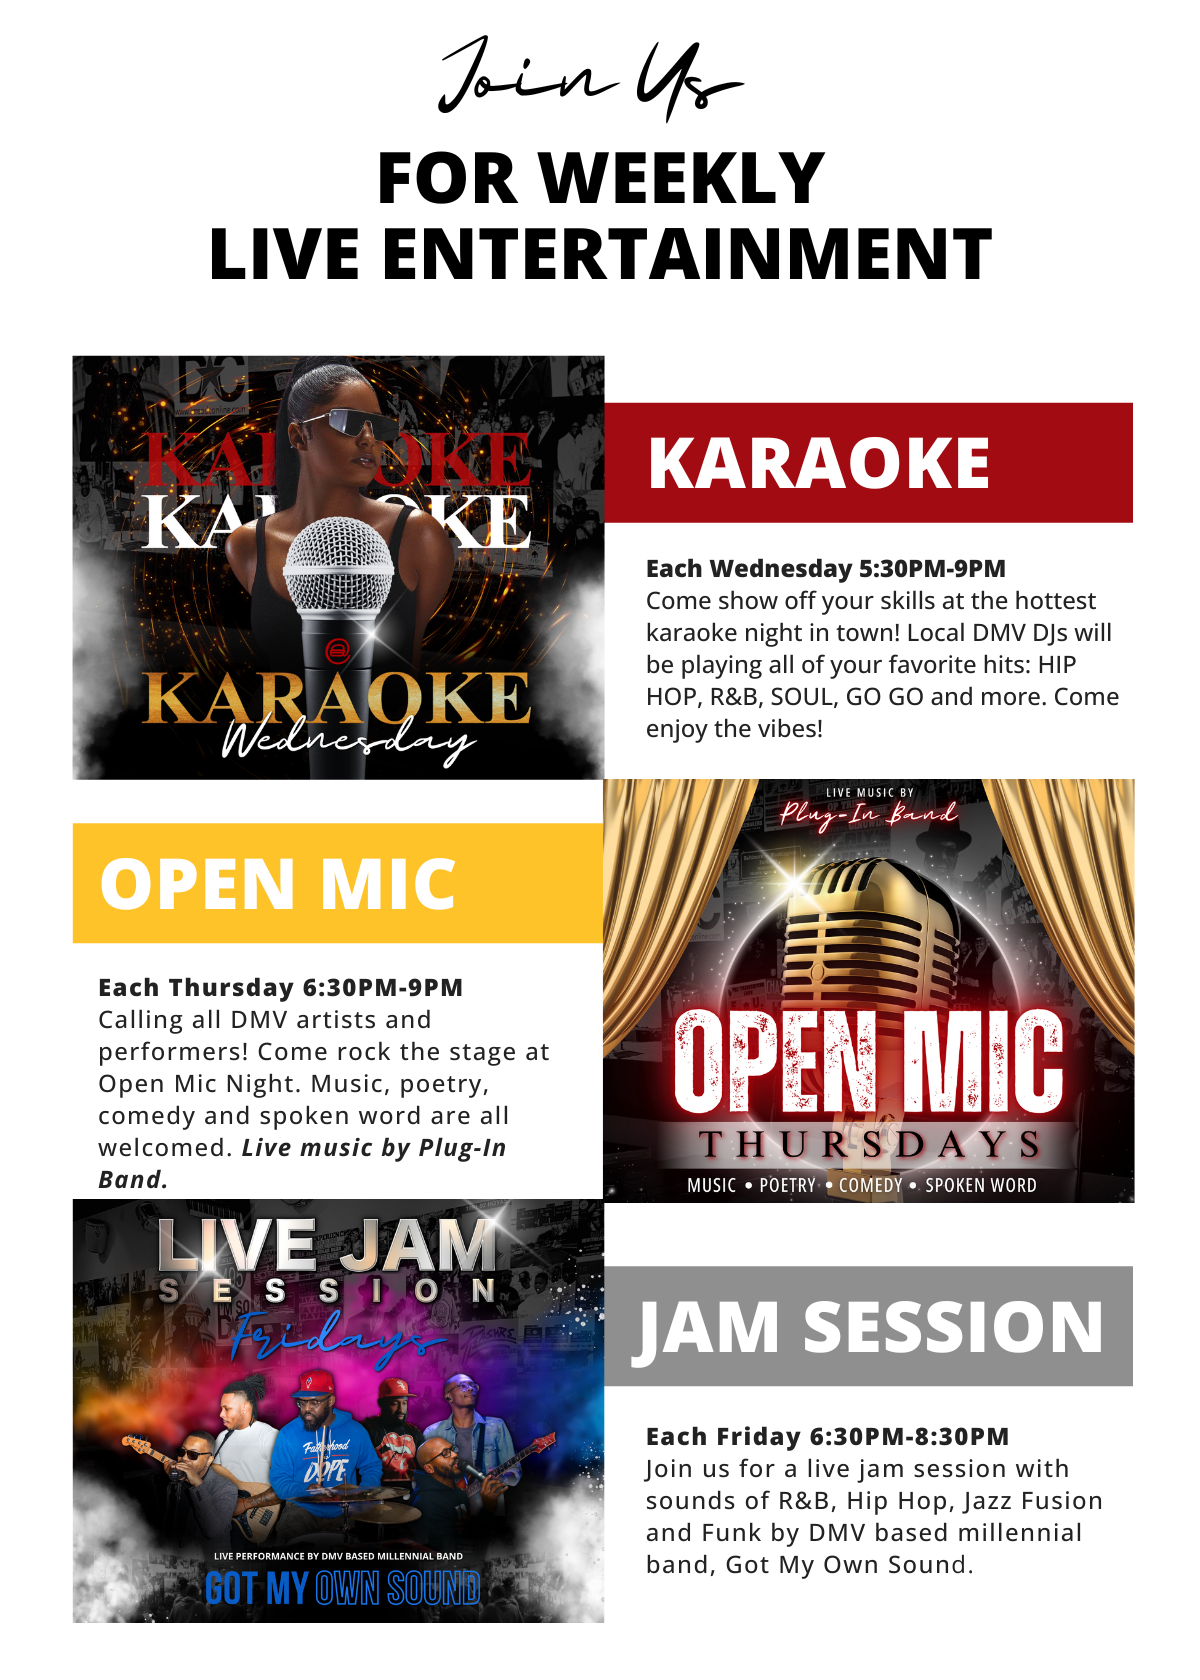 Entertainment, Live Music & Comedy